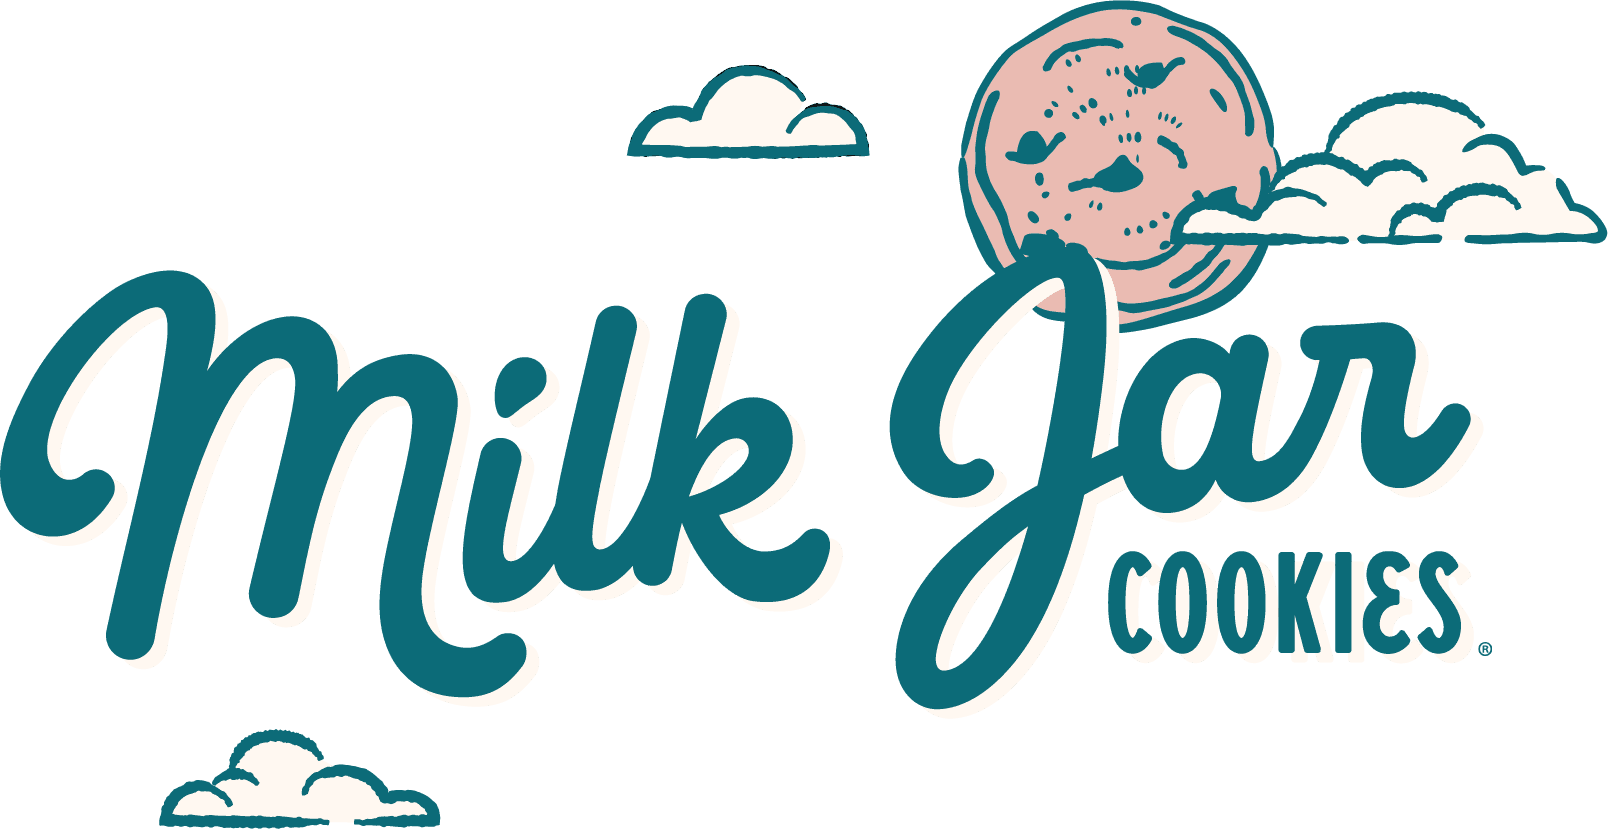 Milk Jar Cookies logo in blue cursive writing with a cookie and clouds in the background.
